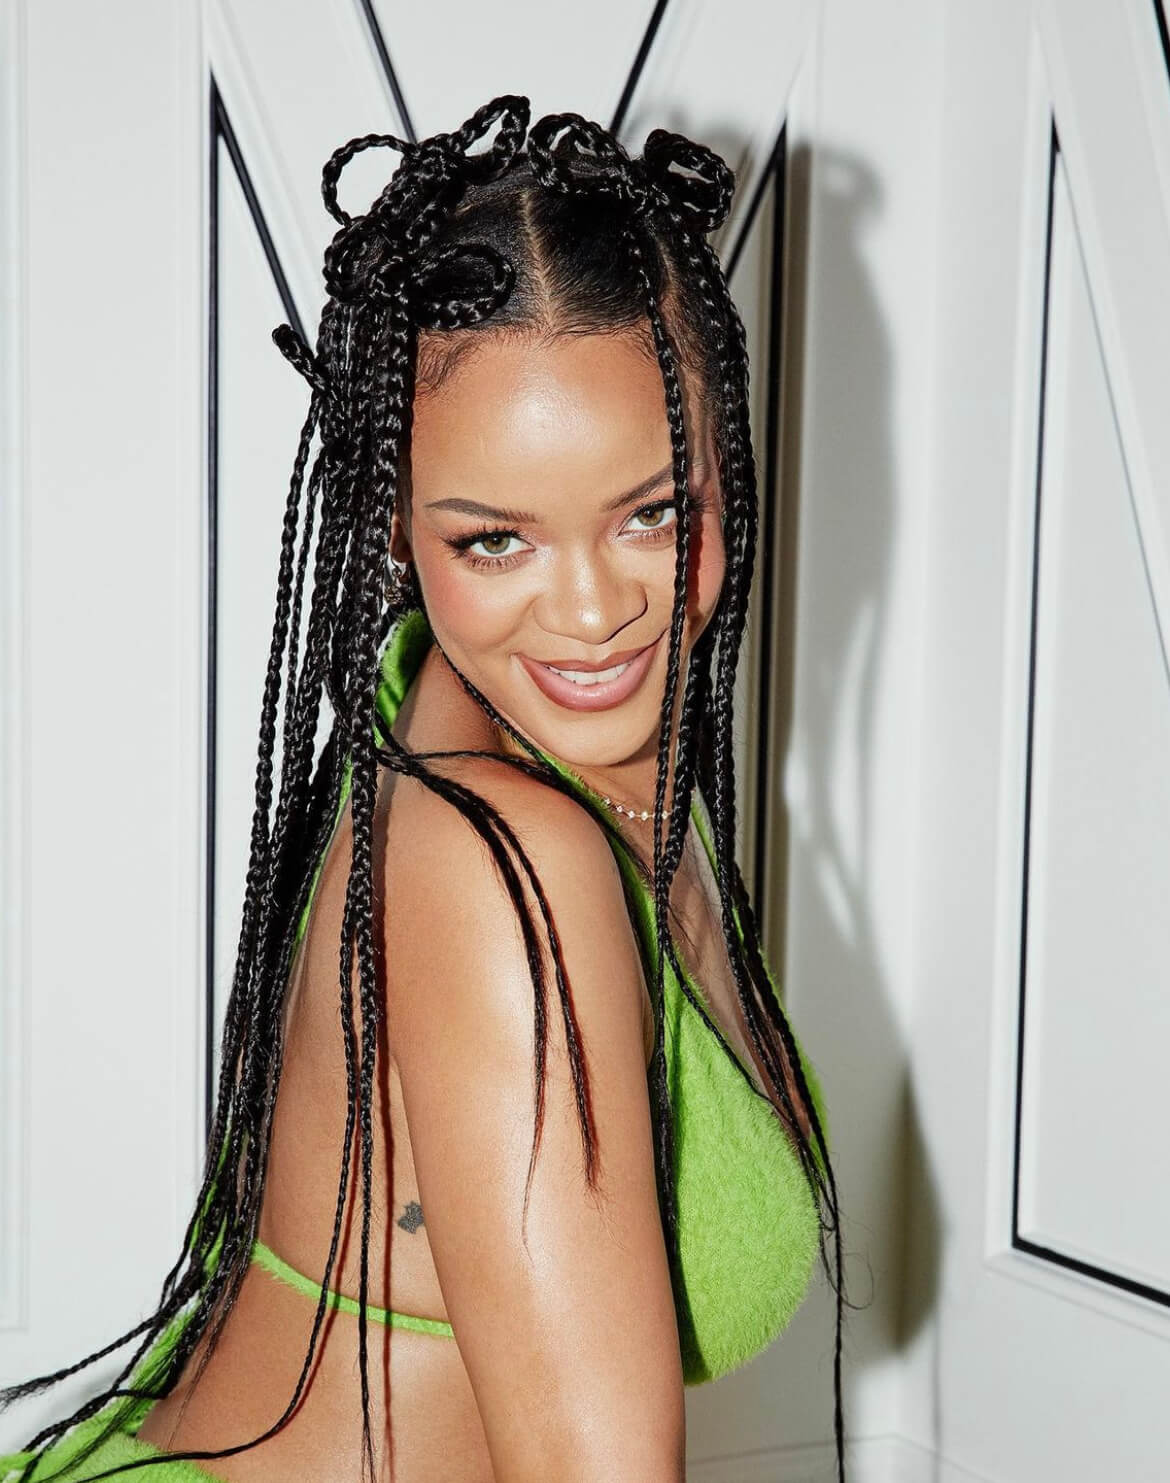 Rihanna smiling at the camera, wearing a green two piece. She posted this on Instagram with a caption "it's cozy grinch season."